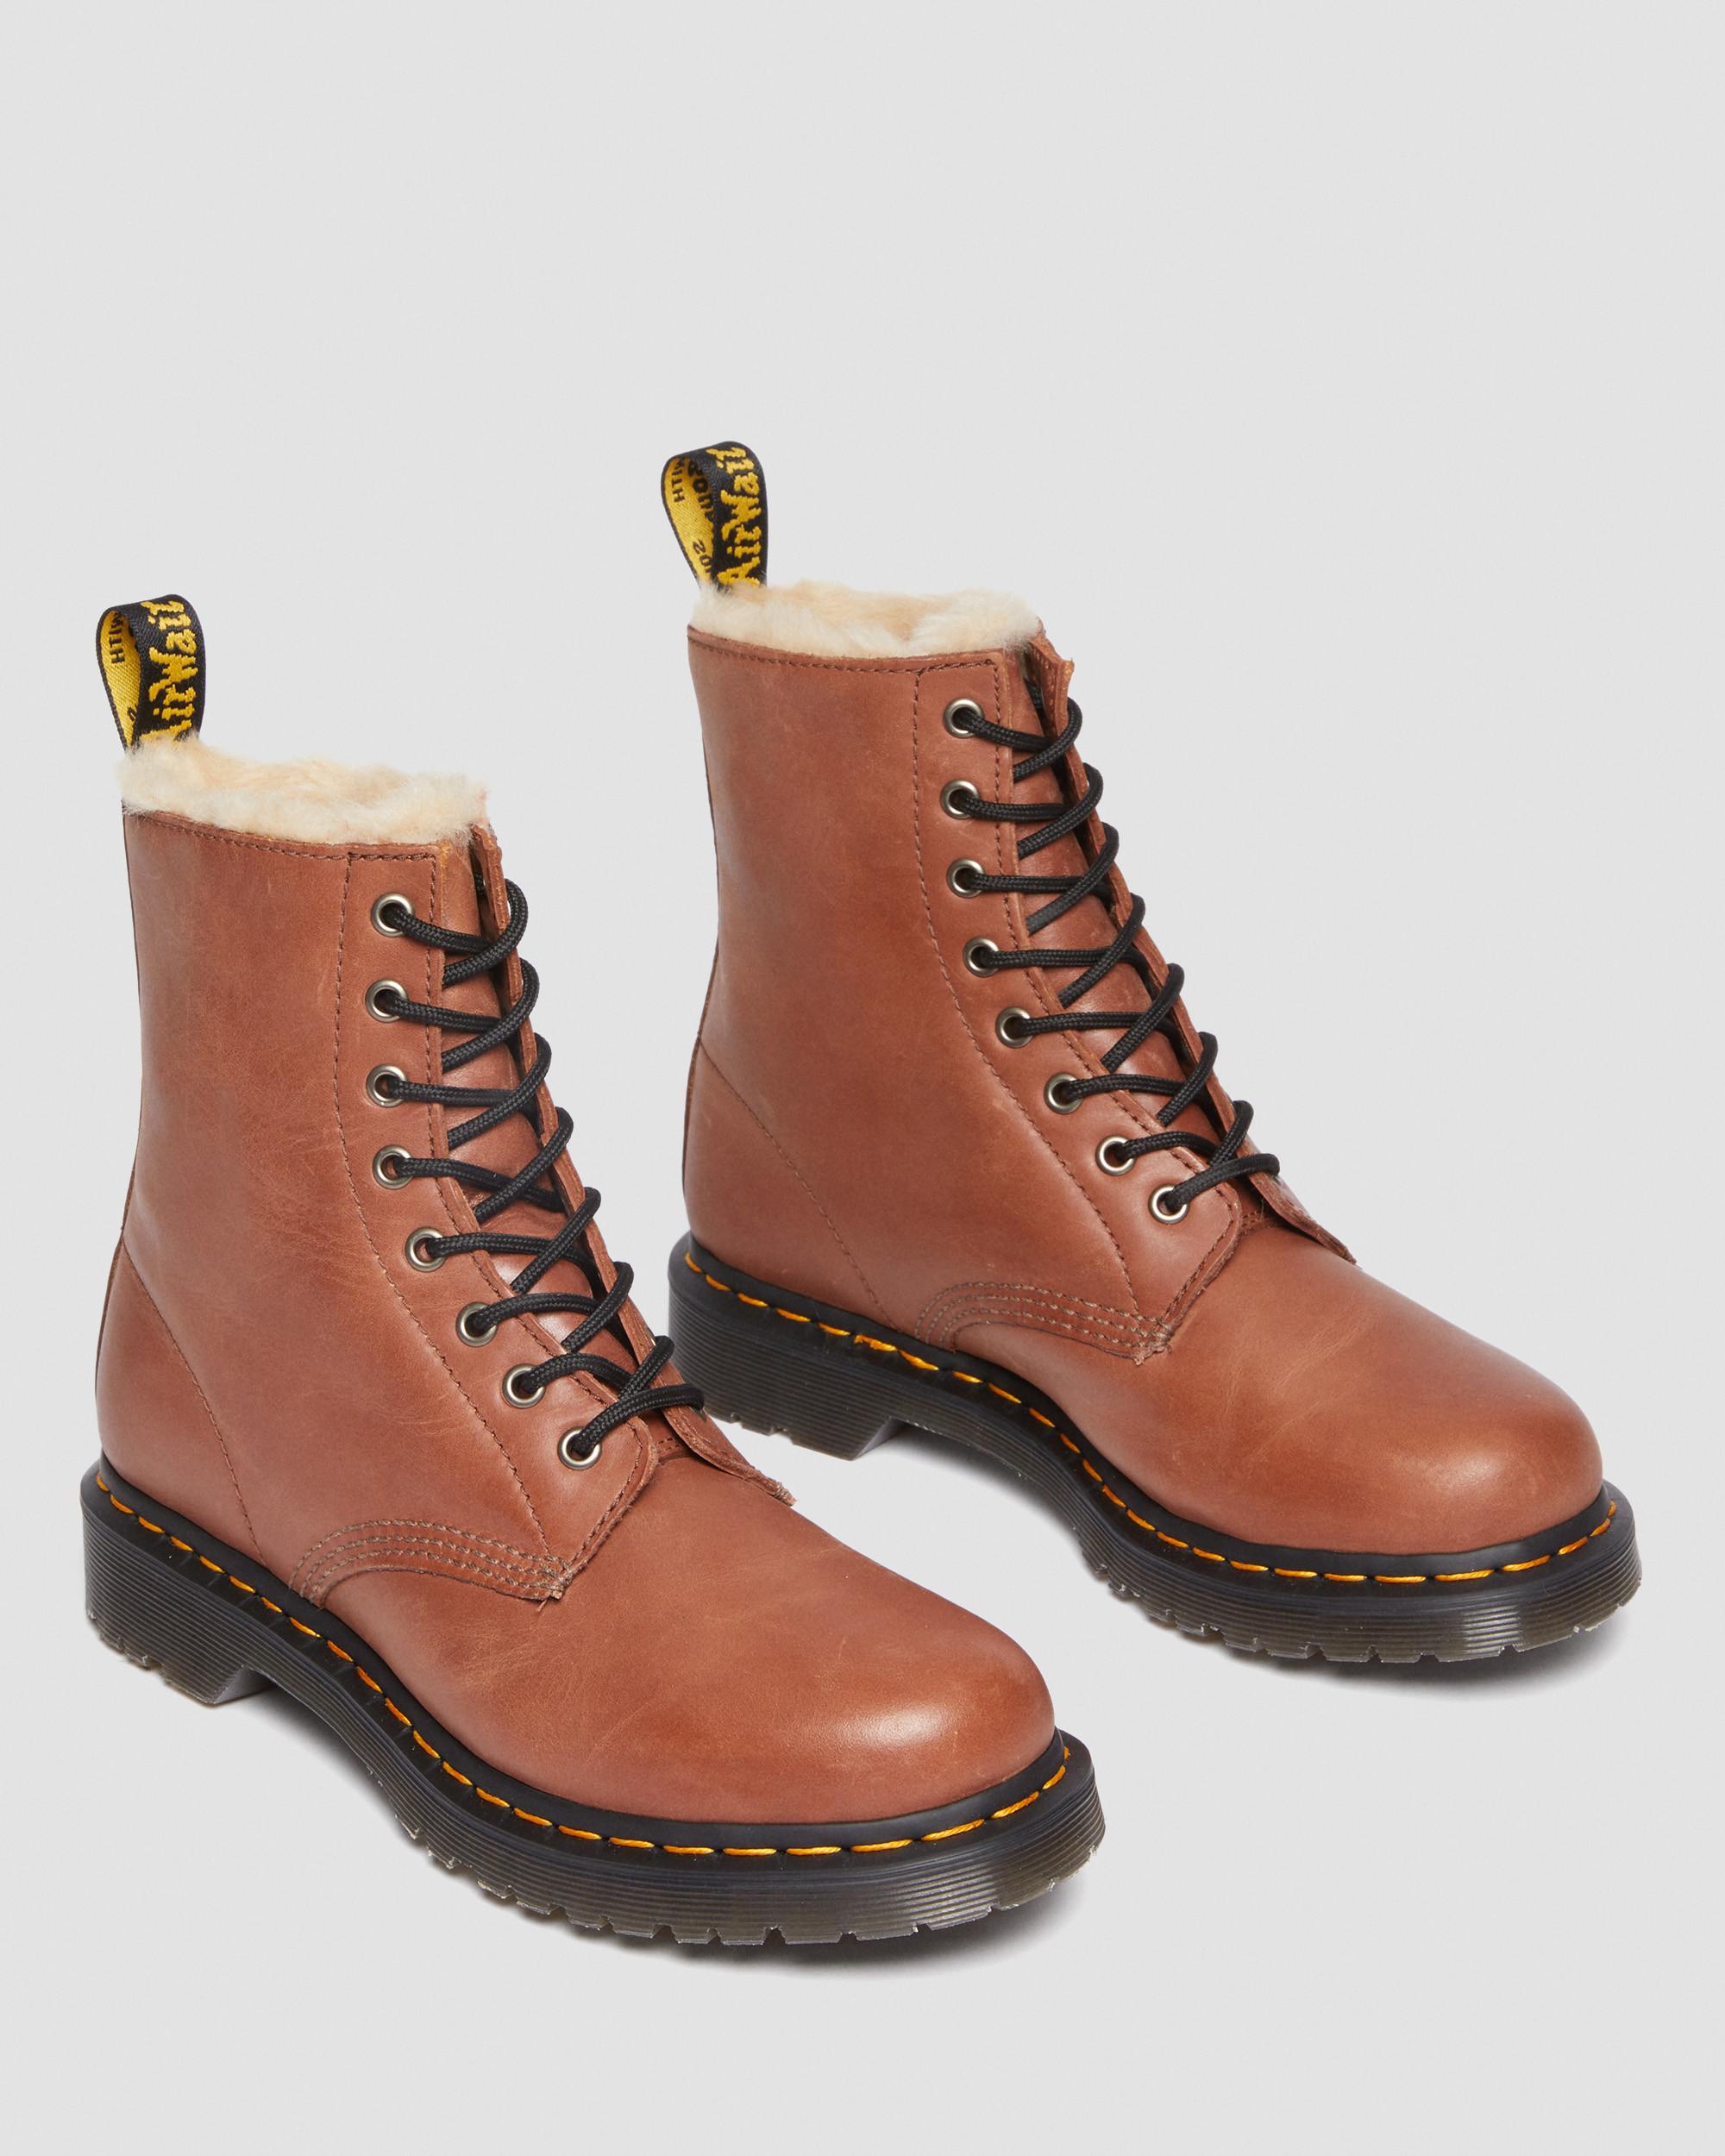 1460 Serena Faux Fur Lined Leather Lace Up Boots1460 Serena Faux Fur Lined Leather Lace Up Boots Dr. Martens